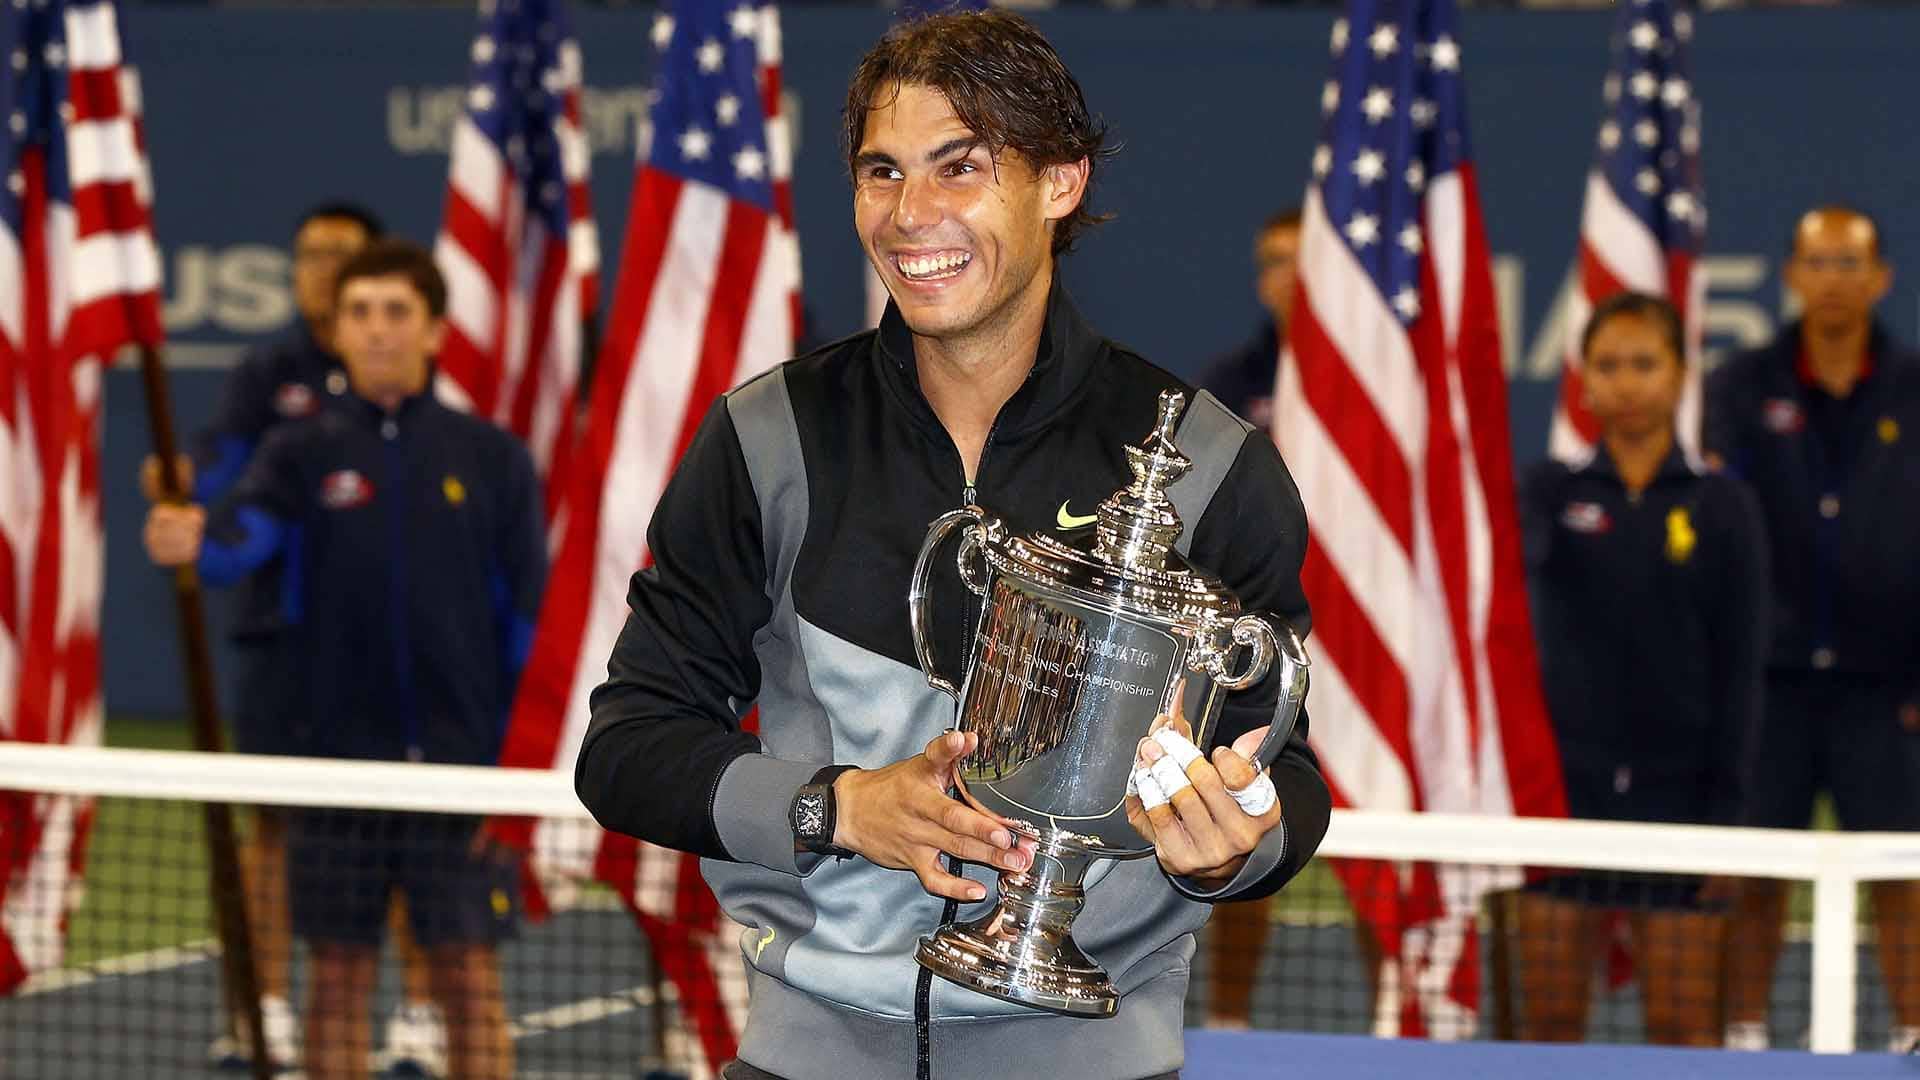 Rafael Nadal beats Novak Djokovic 6-4, 5-7, 6-4, 6-2 to win the US Open and become the youngest man in the Open Era to complete the Career Grand Slam.